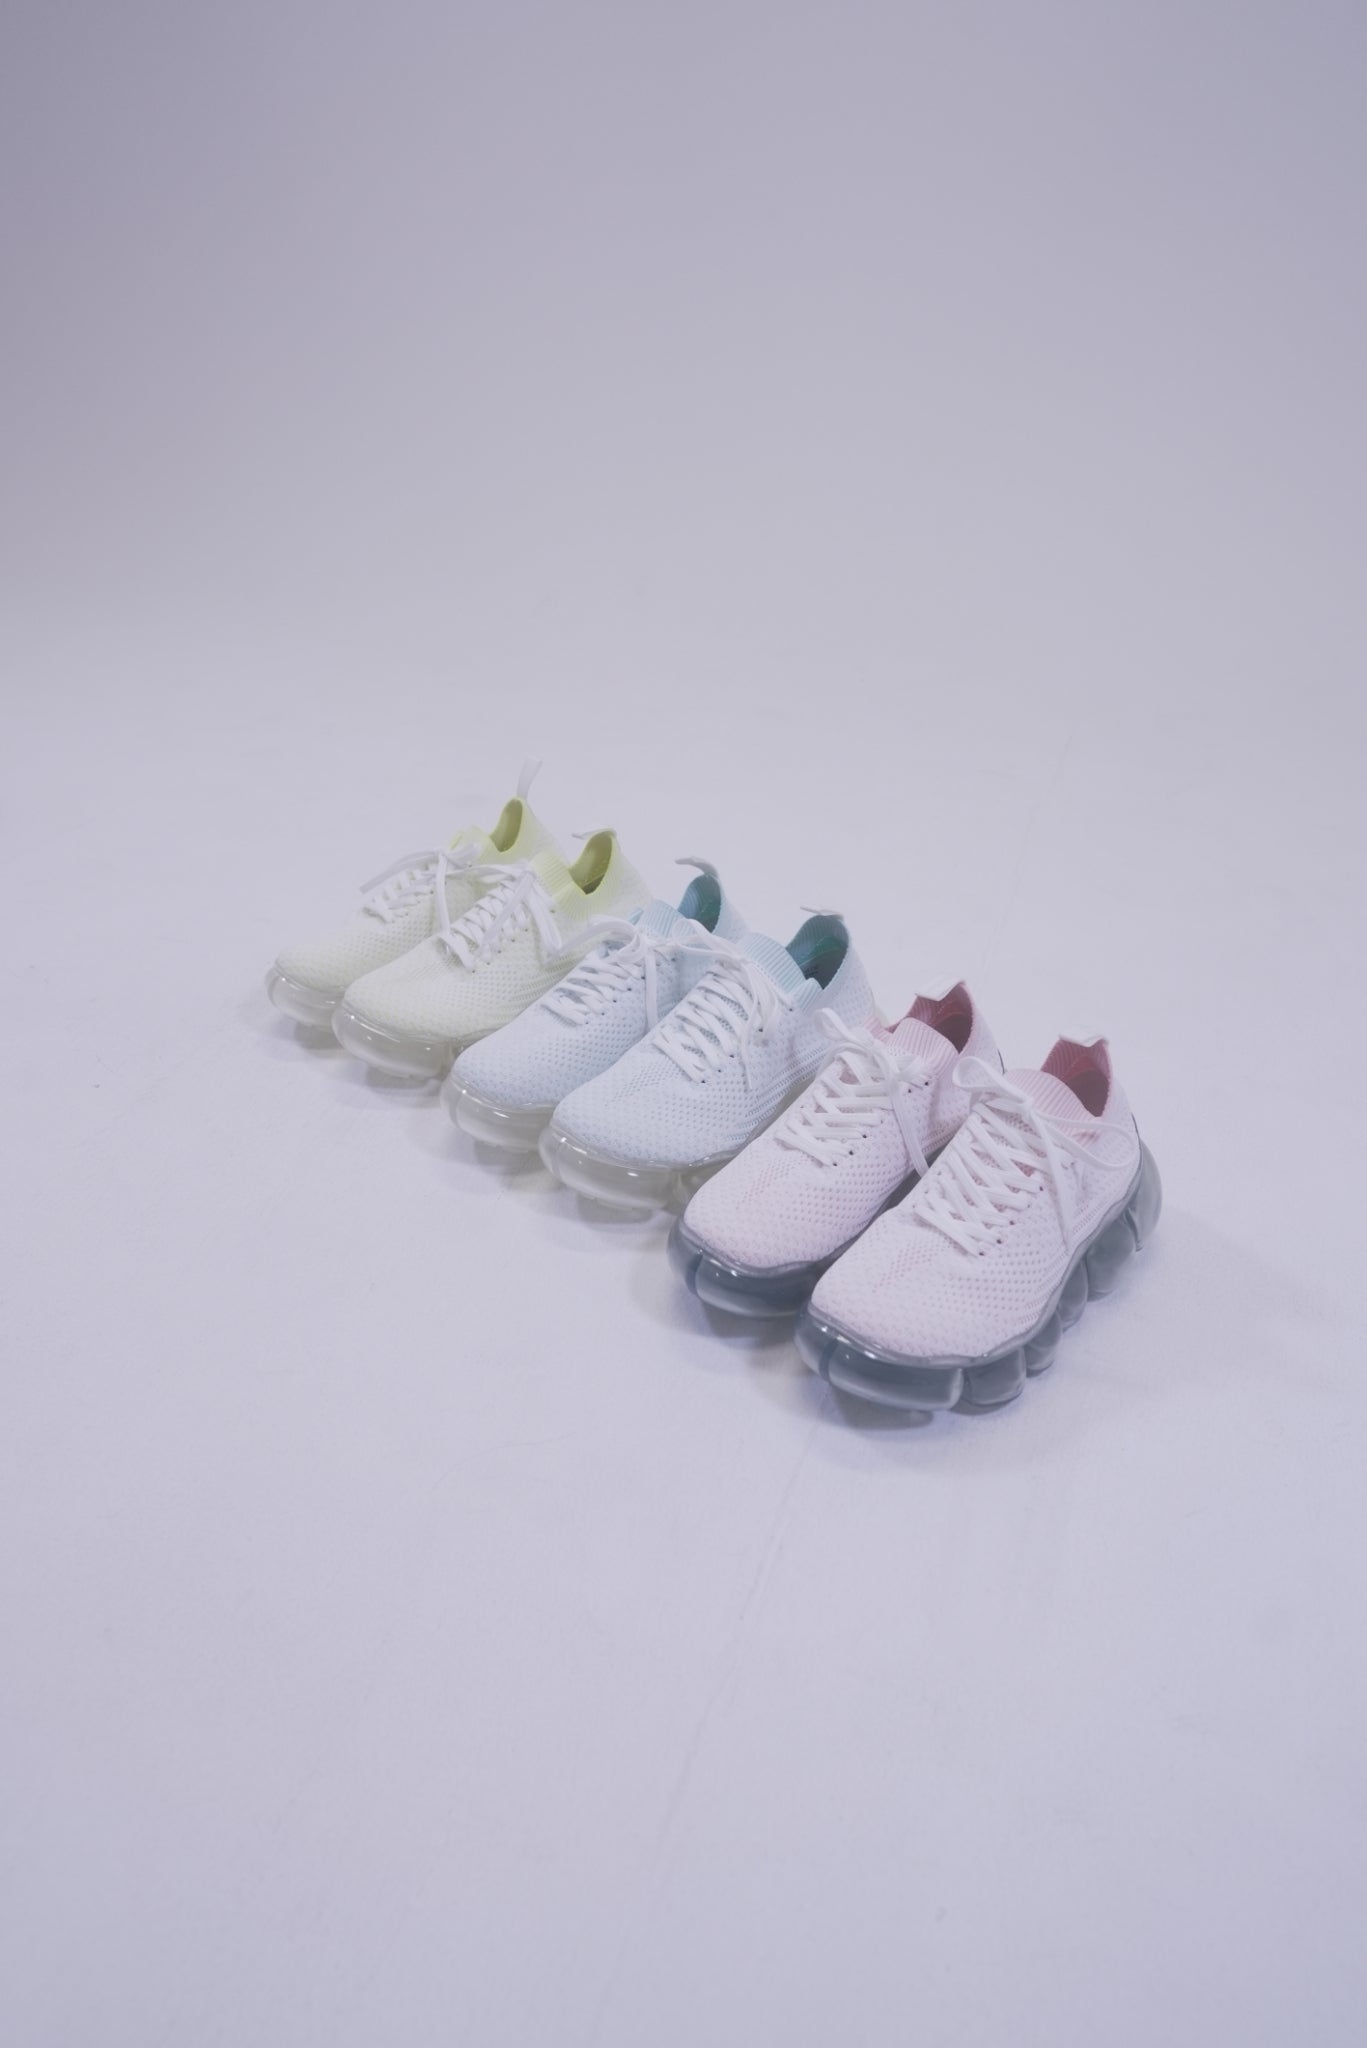 【Gifting】"Jewelry" Basic Shoes / Clear Yellow